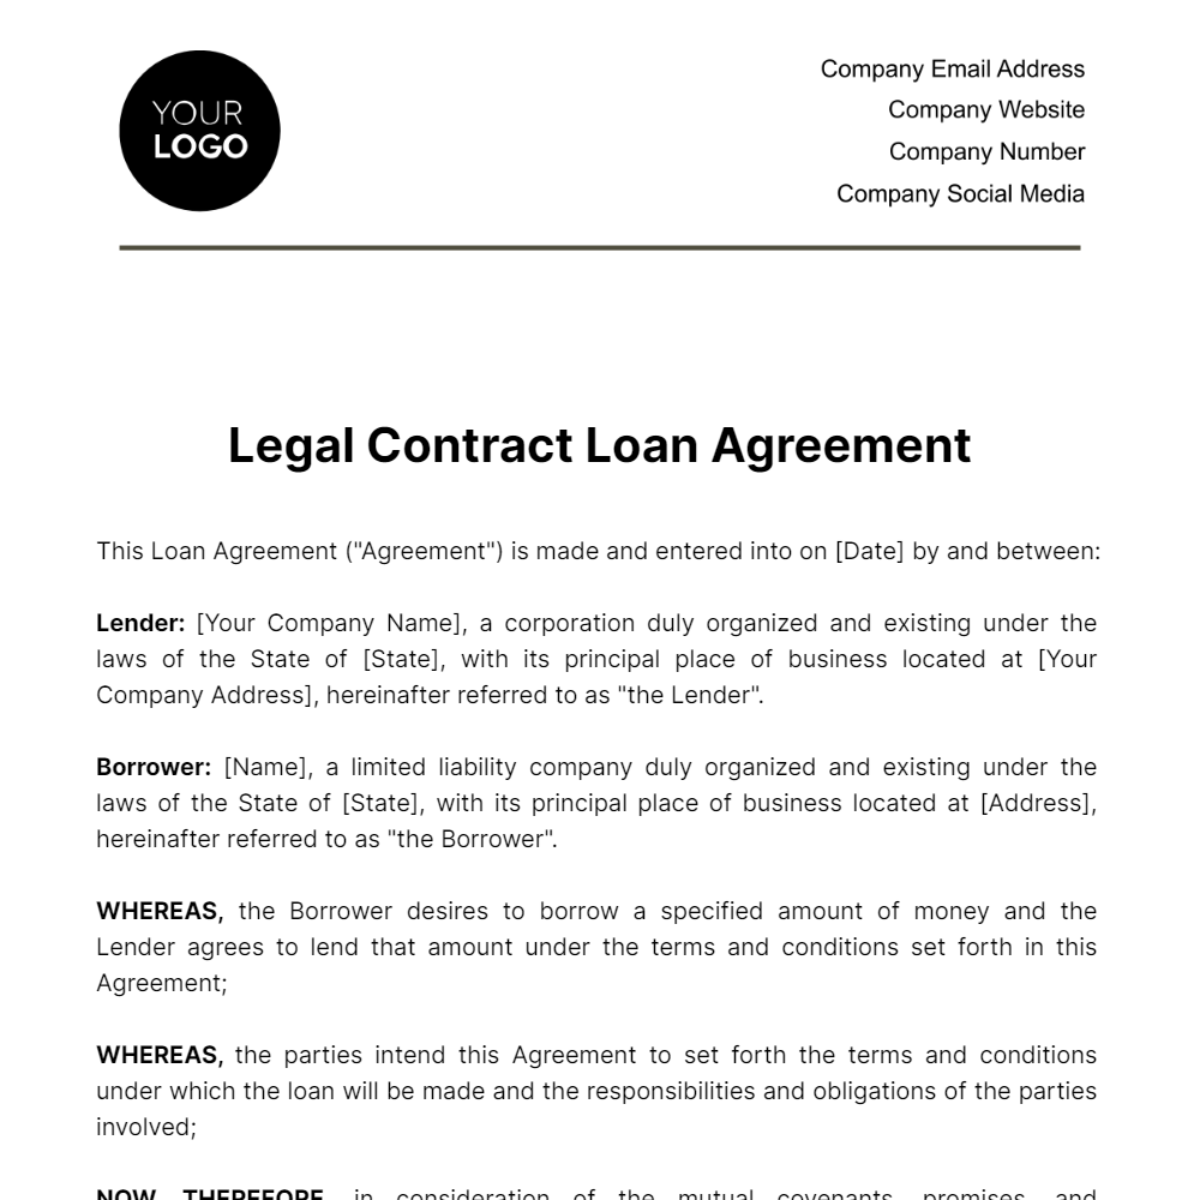 Free Legal Contract Loan Agreement Template